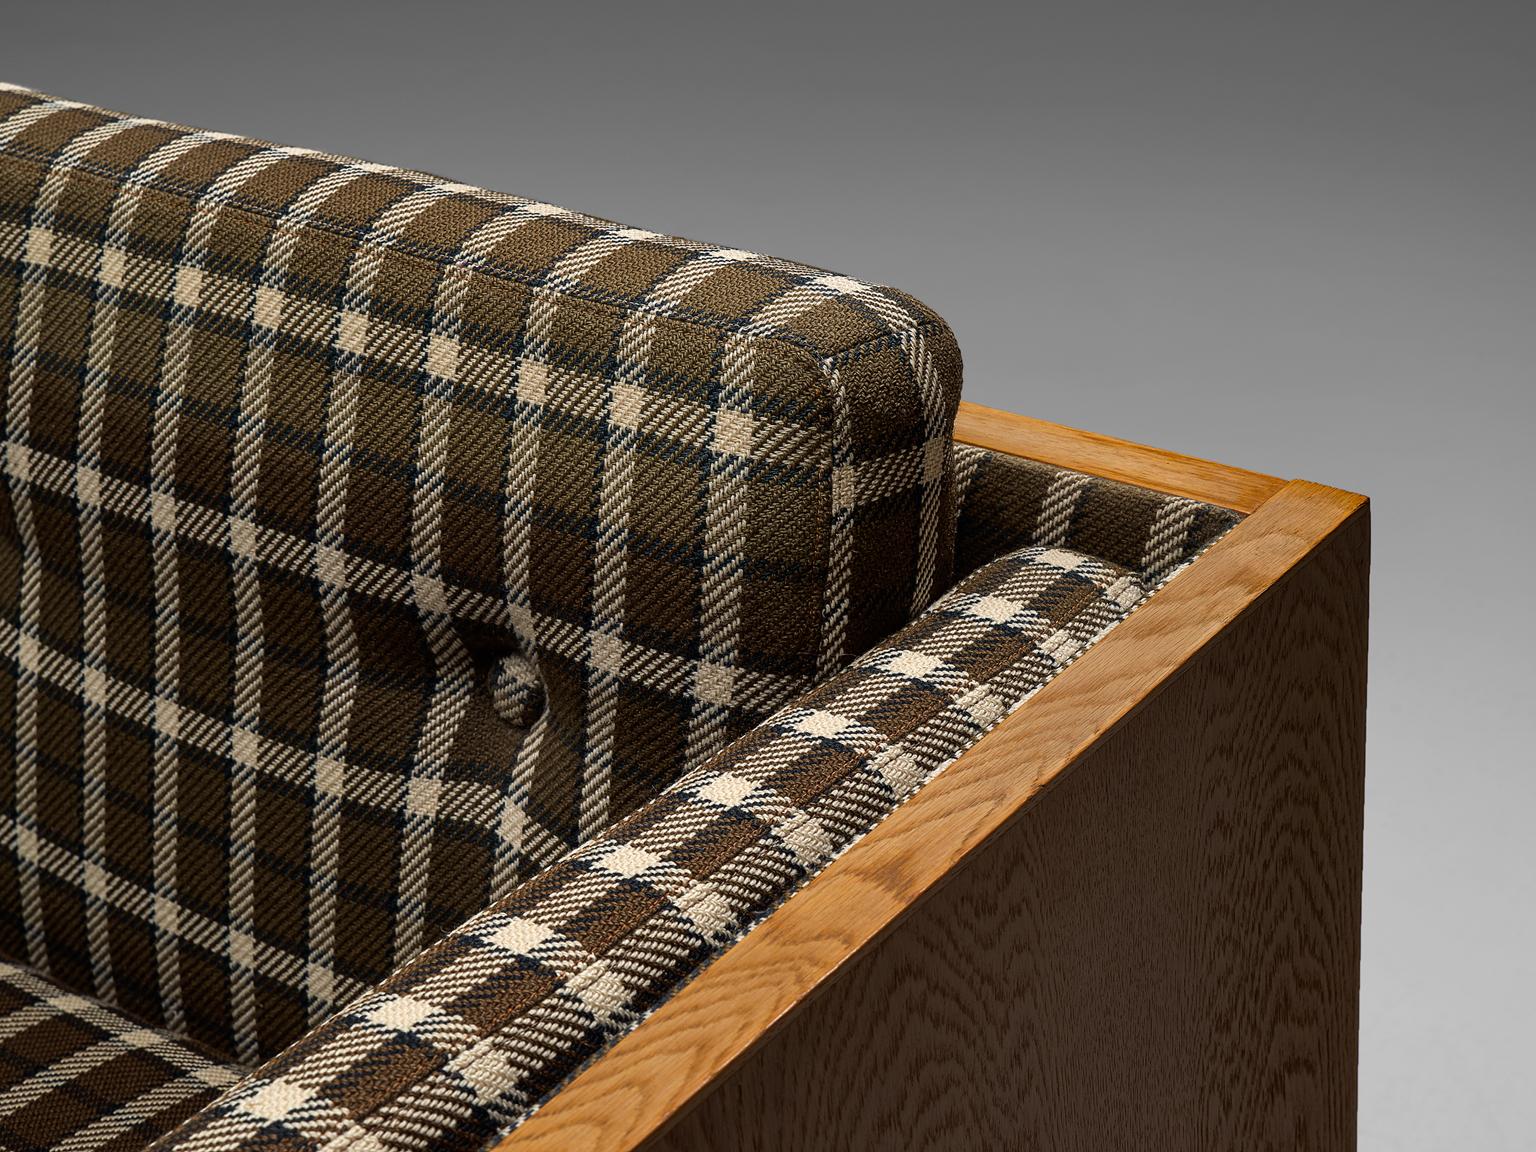 Metal Scandinavian Two-Seat Sofa in Oak and Checkered Upholstery